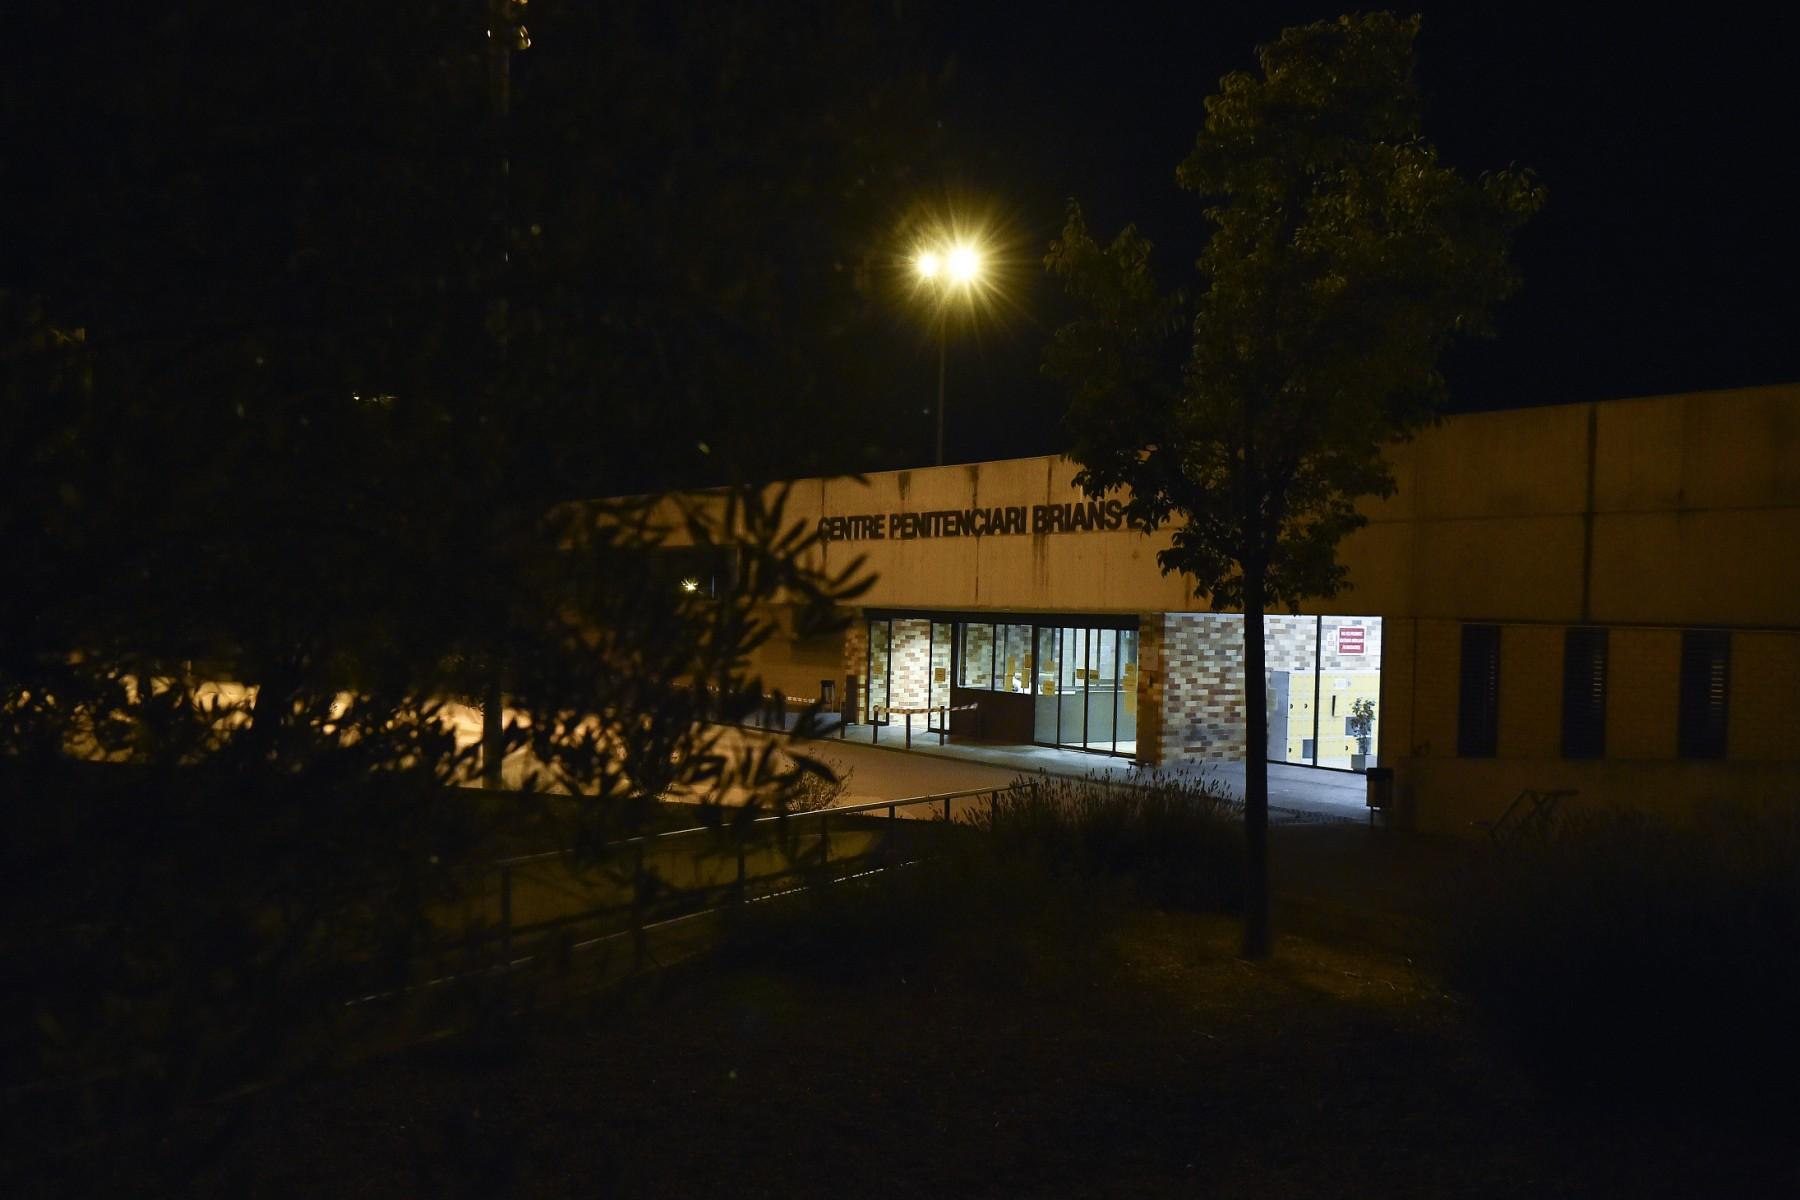 View taken on June 23, 2021 of the Centre Penitenciario Brians 2 jail, in Sant Esteve Sesrovires, near Barcelona, where antivirus software pioneer John McAfee was found dead in his jail cell, shortly after a court approved his extradition to the US where he was wanted for tax evasion. Photo: AFP